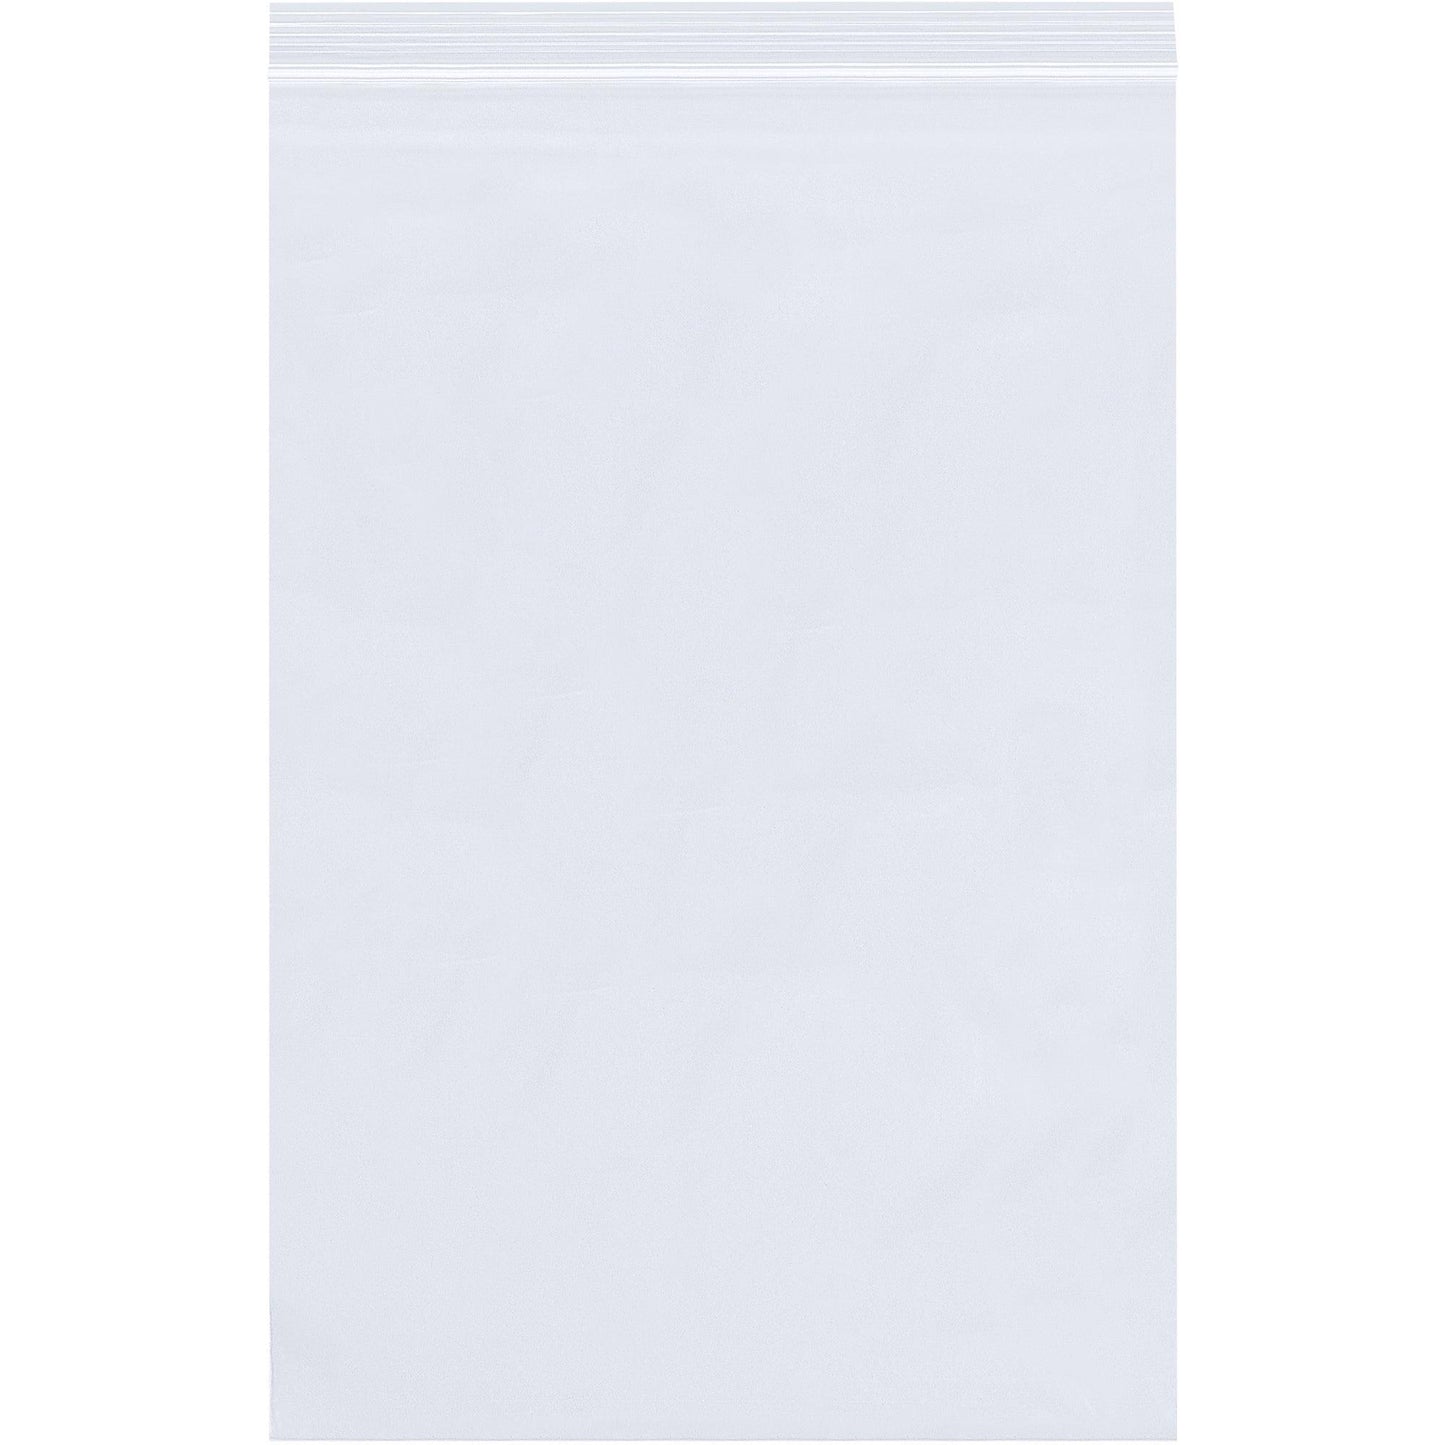 5 x 8" - 4 Mil Reclosable Poly Bags - PB3720